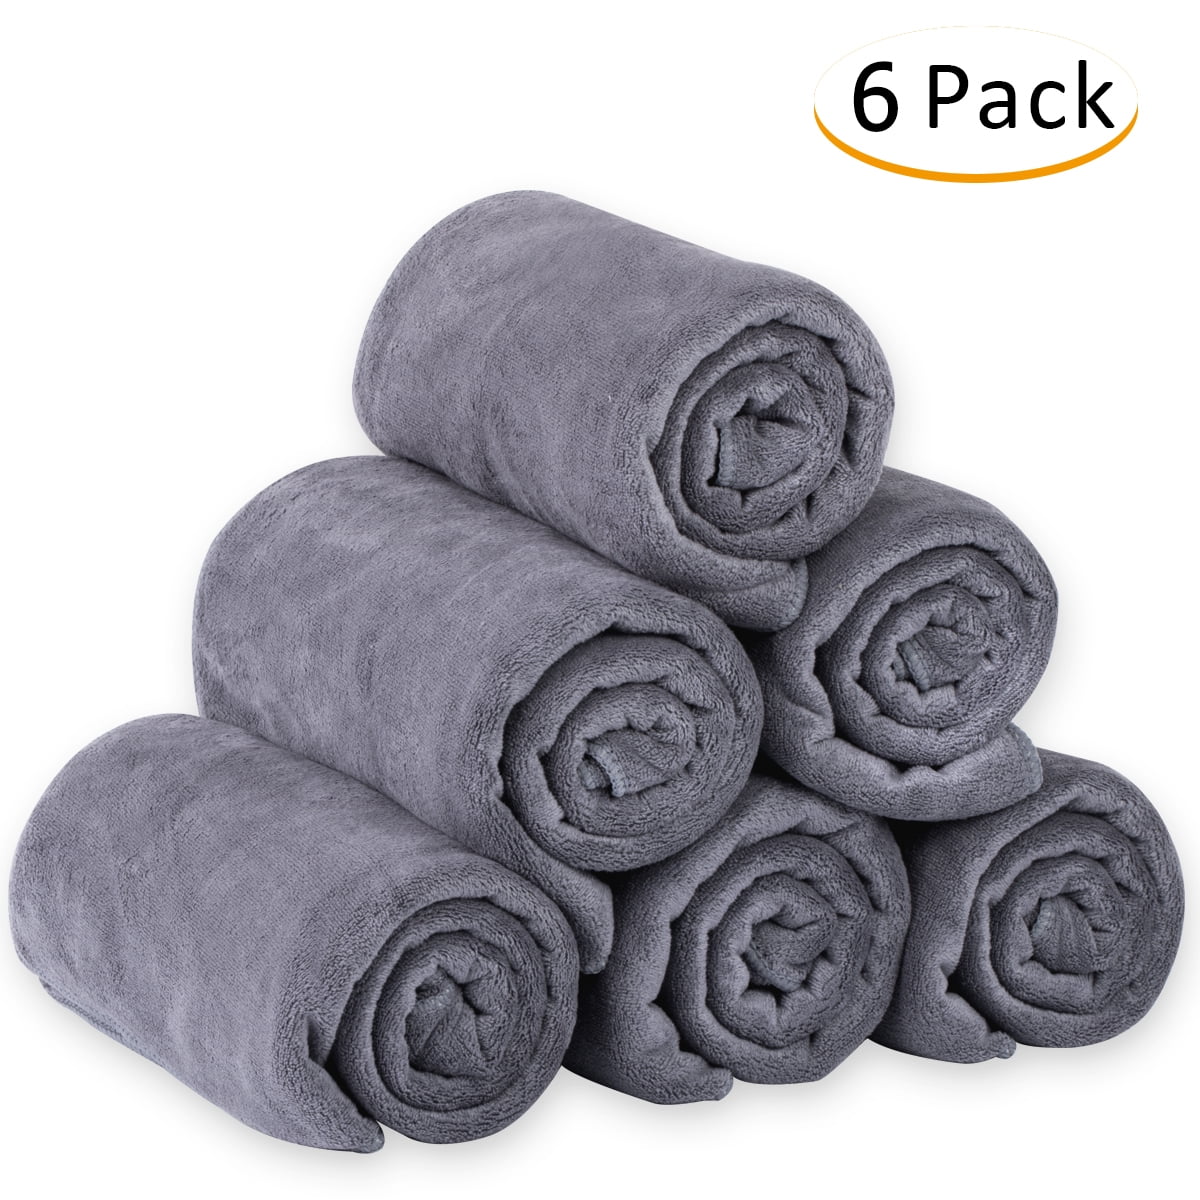 Microfiber Super Towel, 24 by 36-Inch, Gray - Cen-Tec Systems